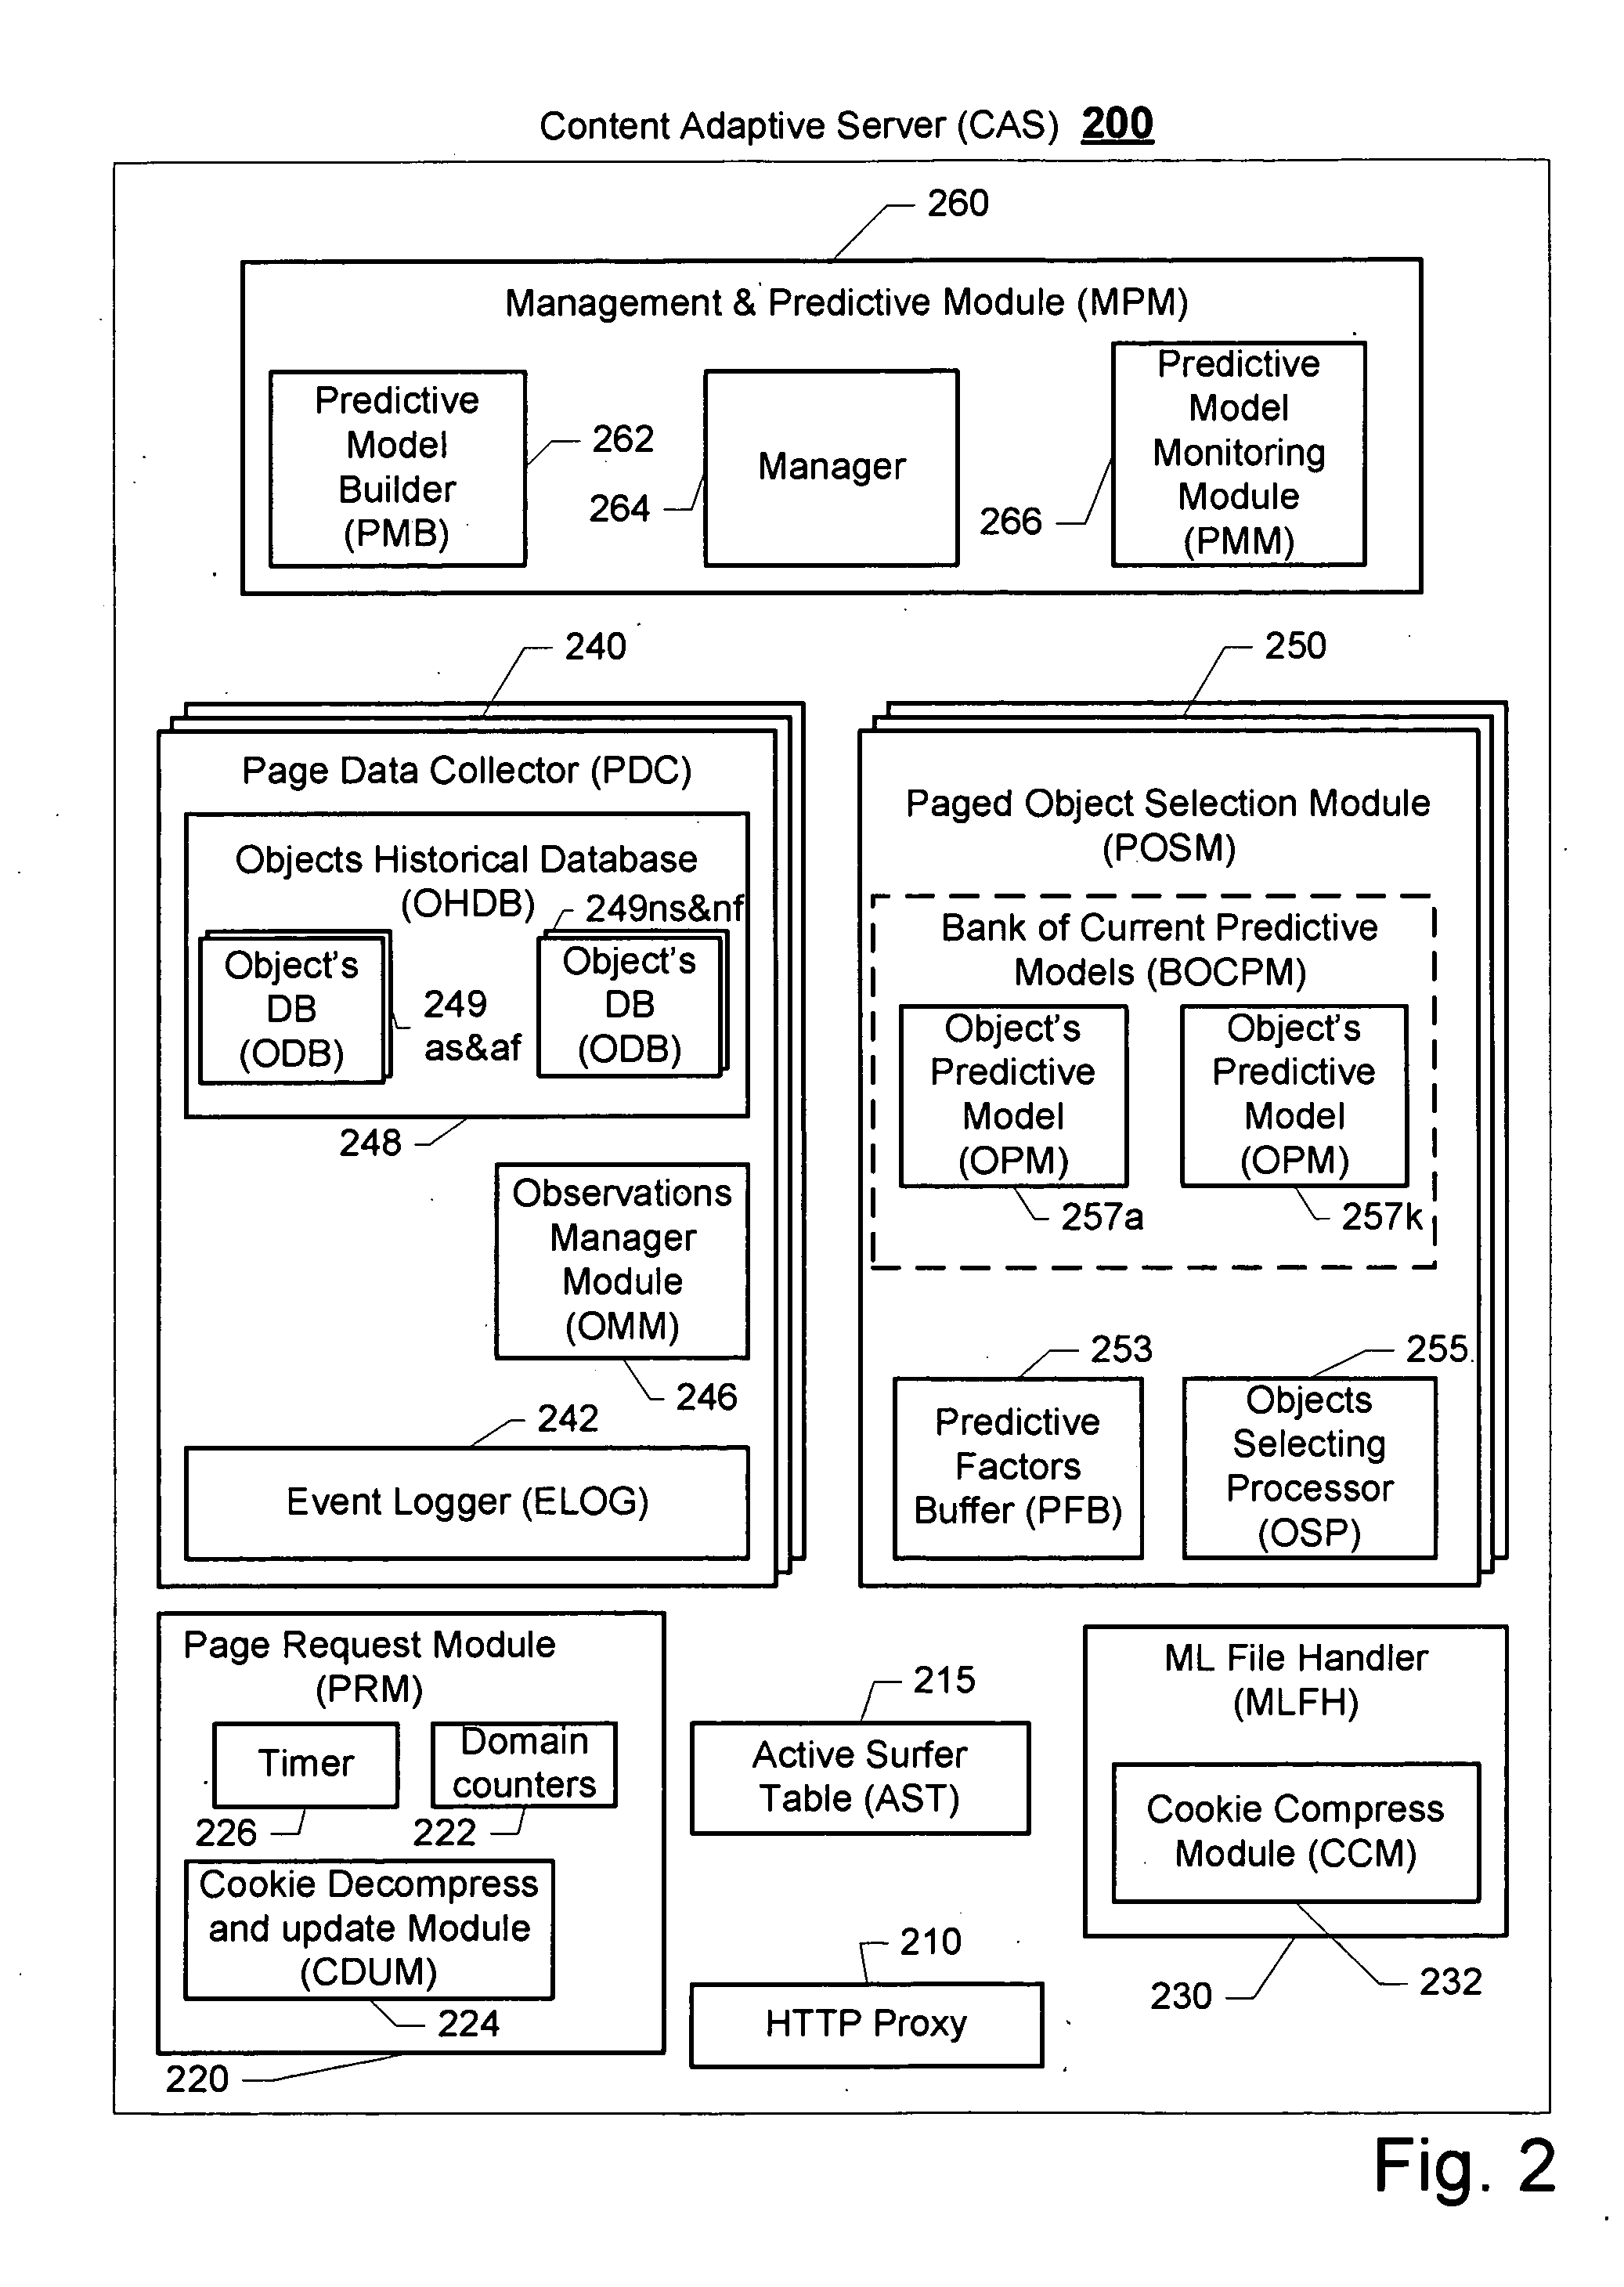 Method and system for providing targeted content to a surfer